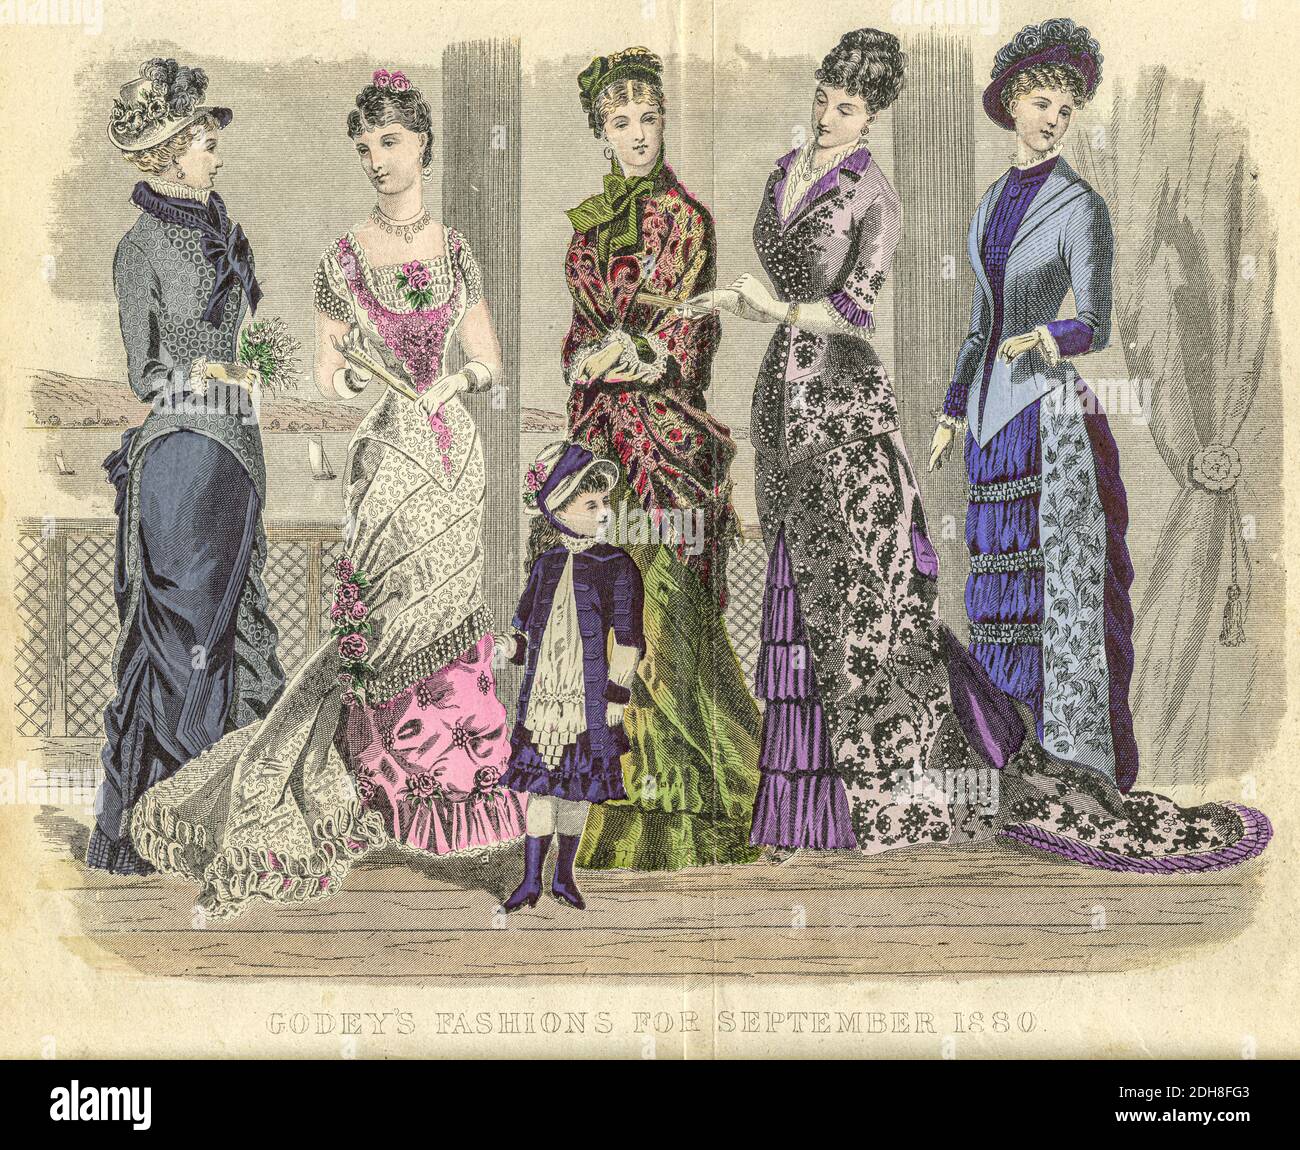 Colour drawing of Godey's women's Fashion for September 1880 from Godey's Lady's Book and Magazine, 1880 Philadelphia, Louis A. Godey, Sarah Josepha Hale, Stock Photo